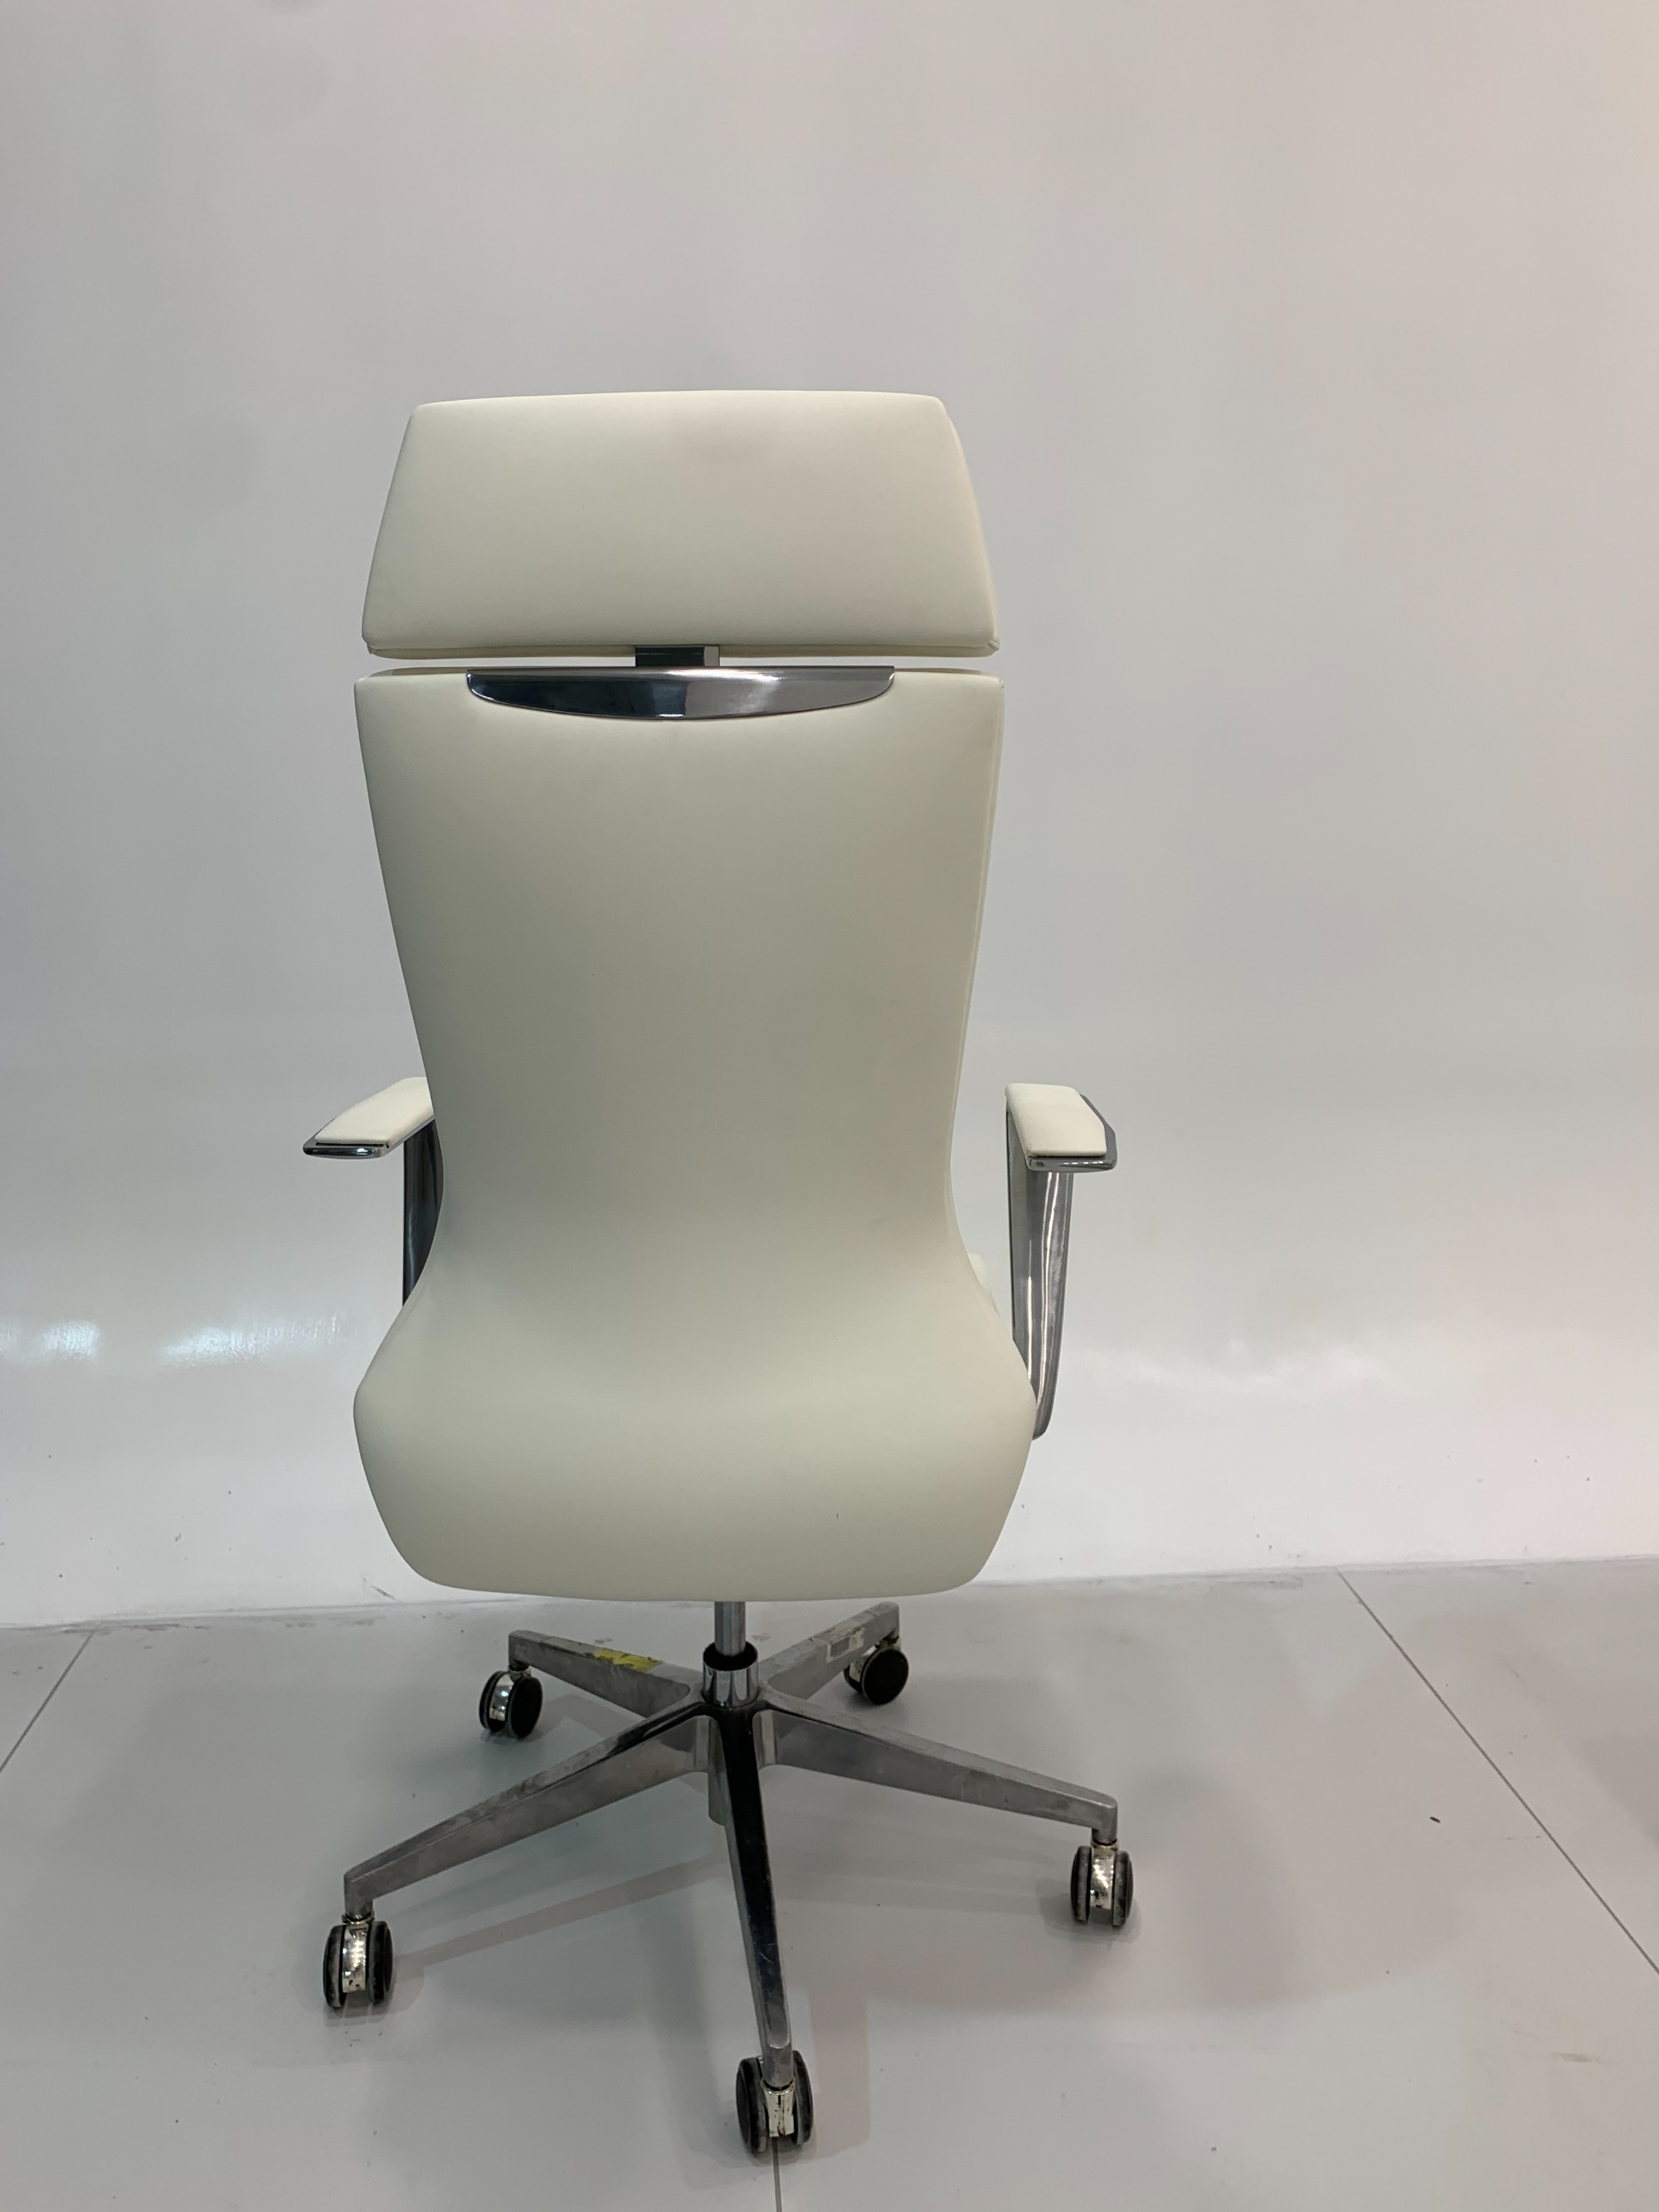 EKAR FURNITURE's Luxury Leather and Iron Office Chair - A Pinnacle of Light Luxury